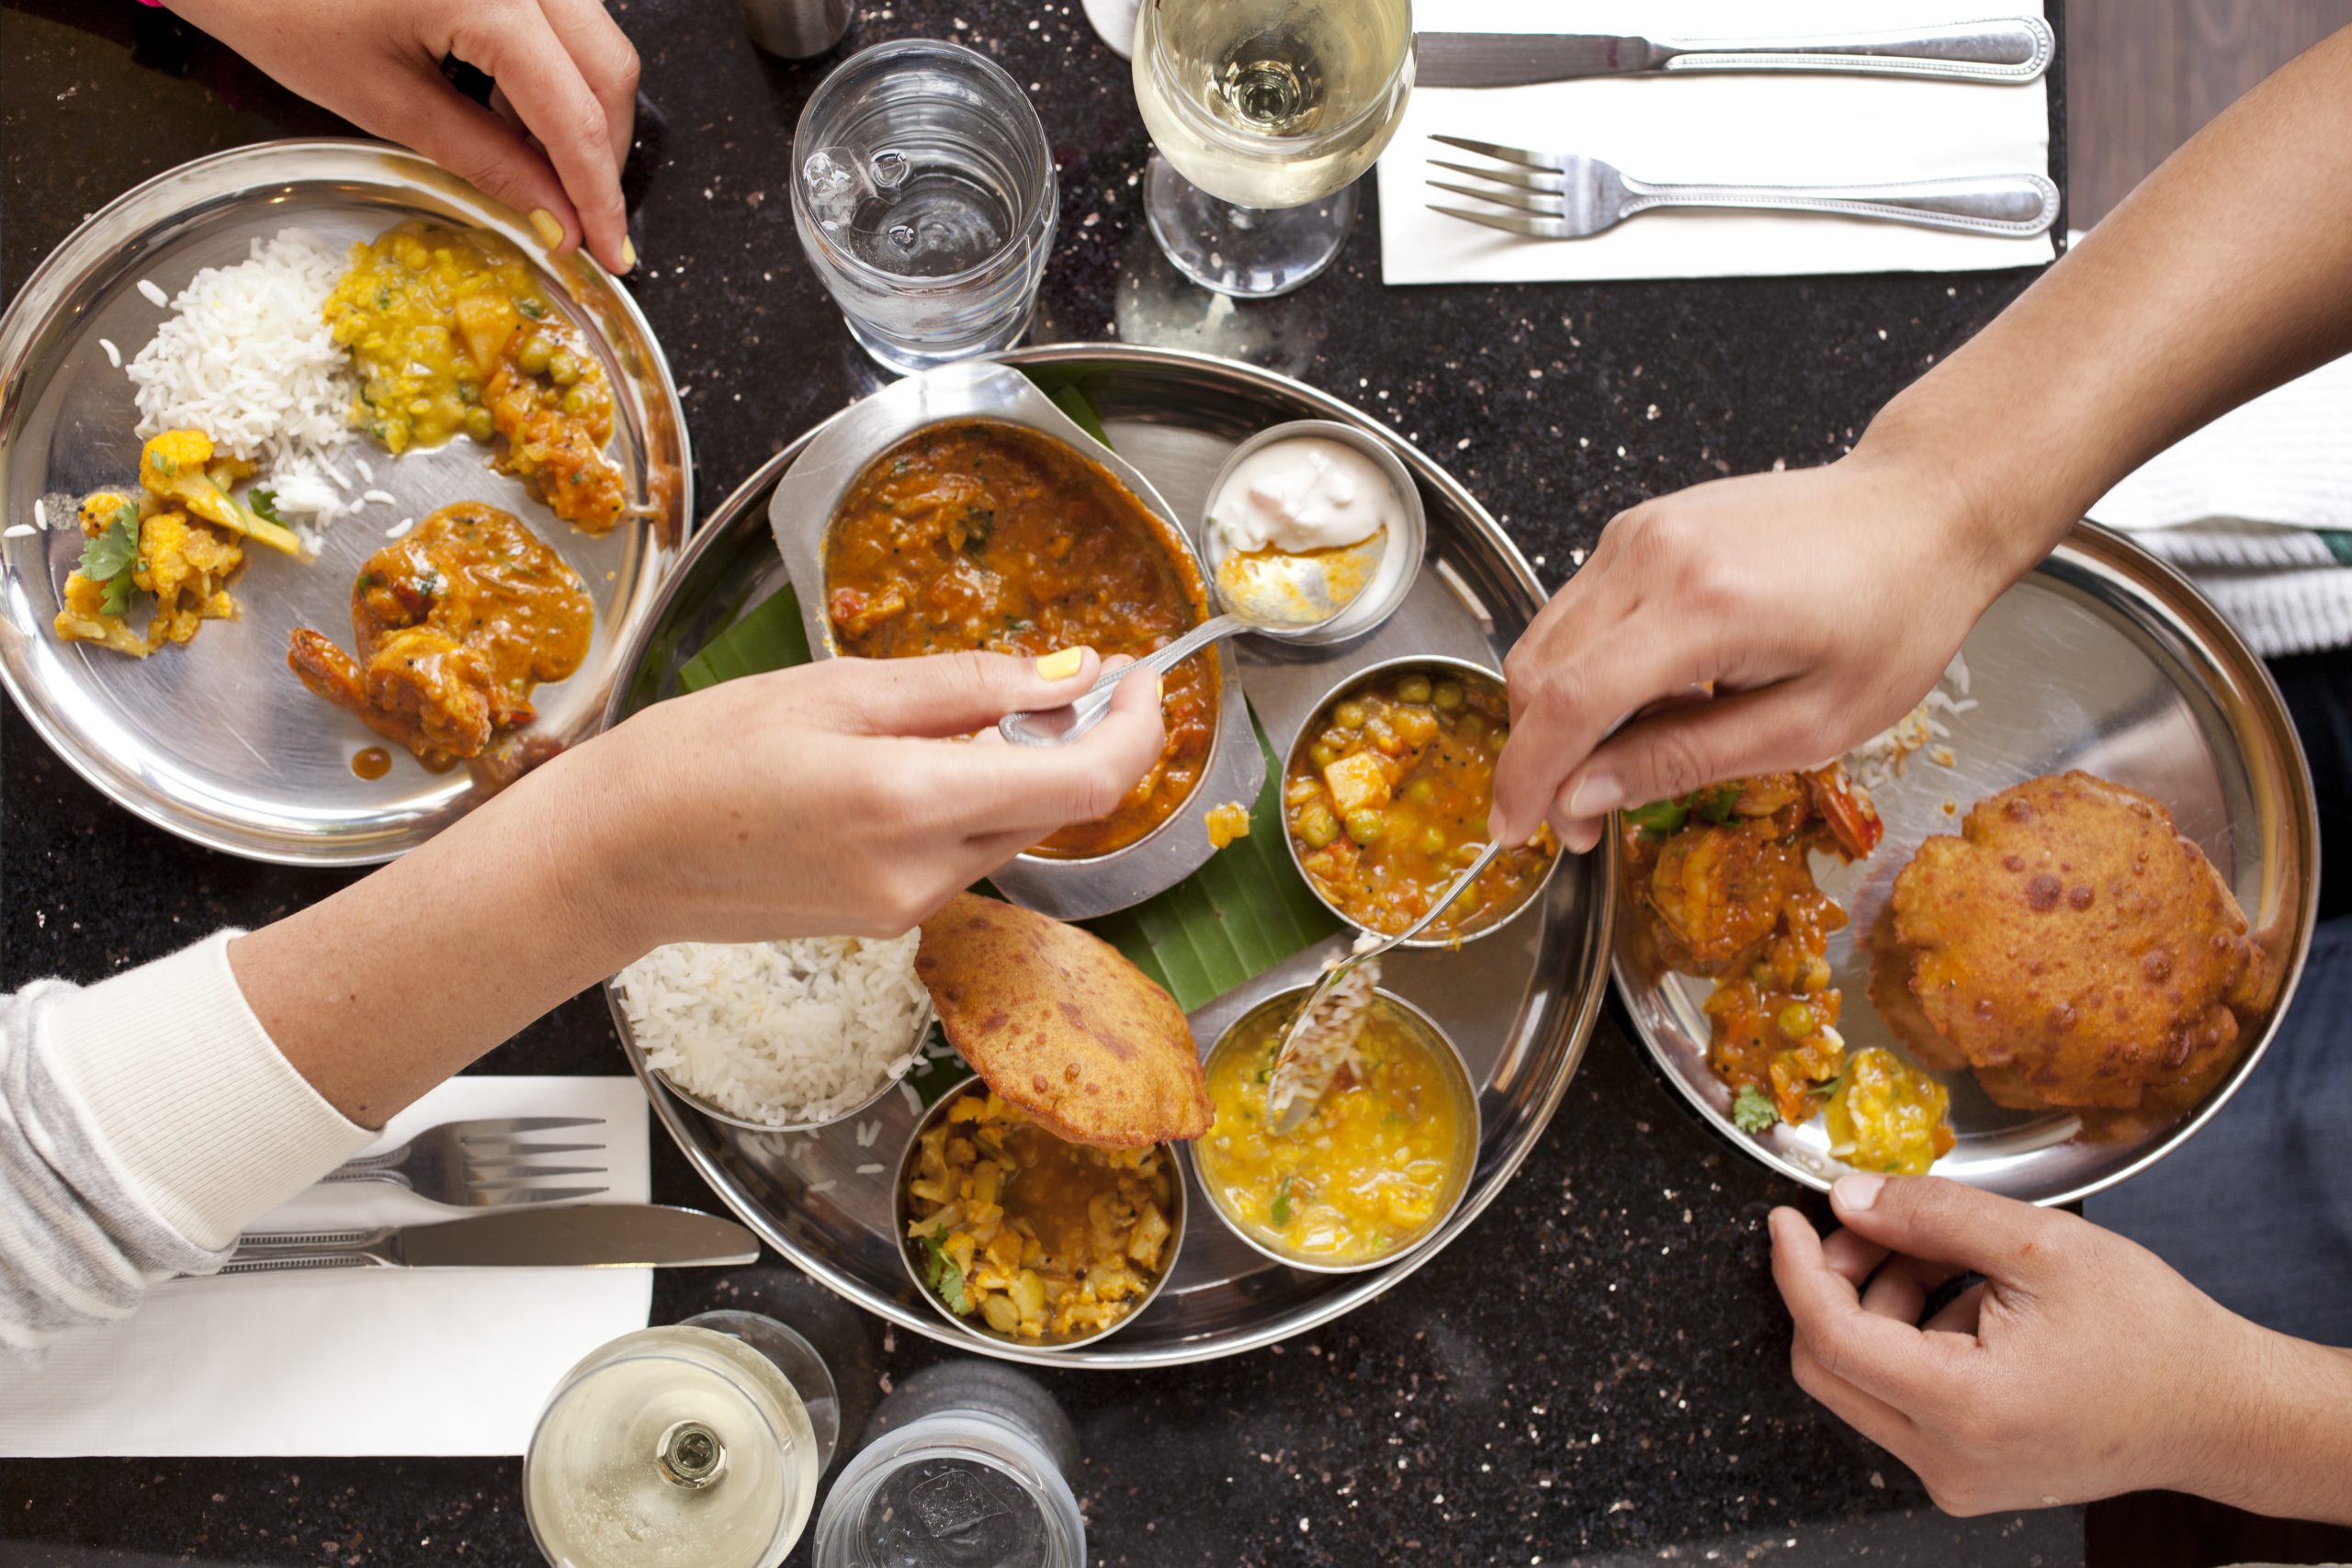 Two people sharing Indian food on a date.  An overhead shot of their hands reaching across the table and serving themselves the different dishes.